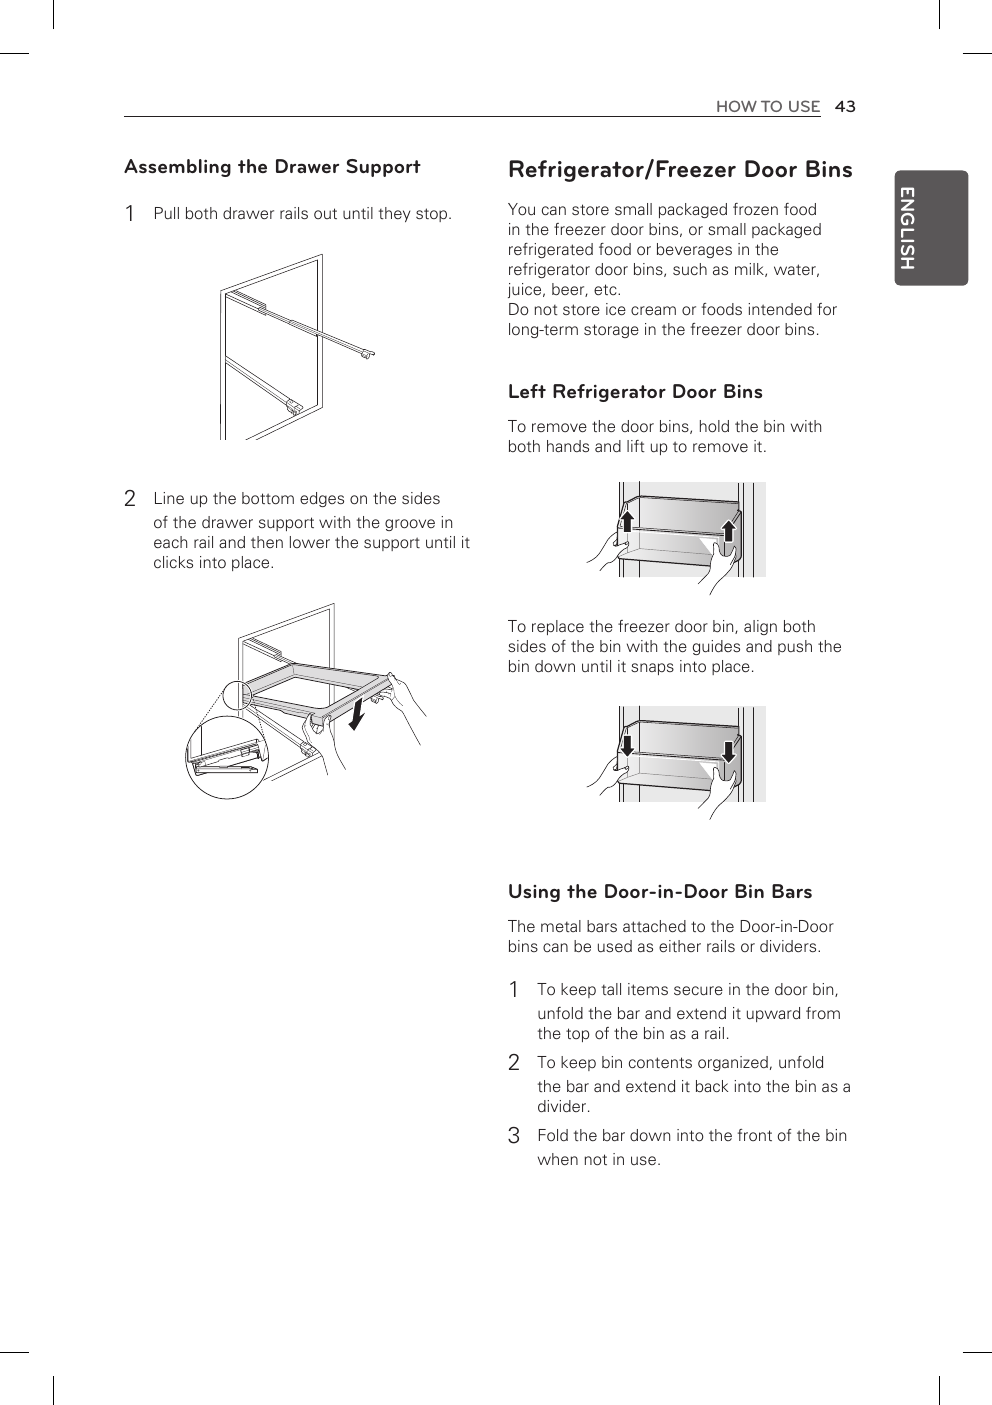 43HOW TO USEENGLISHAssembling the Drawer Support1 Pull both drawer rails out until they stop.2 Line up the bottom edges on the sides of the drawer support with the groove in each rail and then lower the support until it clicks into place.Refrigerator/Freezer Door BinsYou can store small packaged frozen food in the freezer door bins, or small packaged refrigerated food or beverages in the refrigerator door bins, such as milk, water, juice, beer, etc.Do not store ice cream or foods intended for long-term storage in the freezer door bins.Left Refrigerator Door BinsTo remove the door bins, hold the bin with both hands and lift up to remove it.To replace the freezer door bin, align both sides of the bin with the guides and push the bin down until it snaps into place.Using the Door-in-Door Bin BarsThe metal bars attached to the Door-in-Door bins can be used as either rails or dividers.1 To keep tall items secure in the door bin,unfold the bar and extend it upward from the top of the bin as a rail.2 To keep bin contents organized, unfoldthe bar and extend it back into the bin as a divider.3 Fold the bar down into the front of the binwhen not in use.